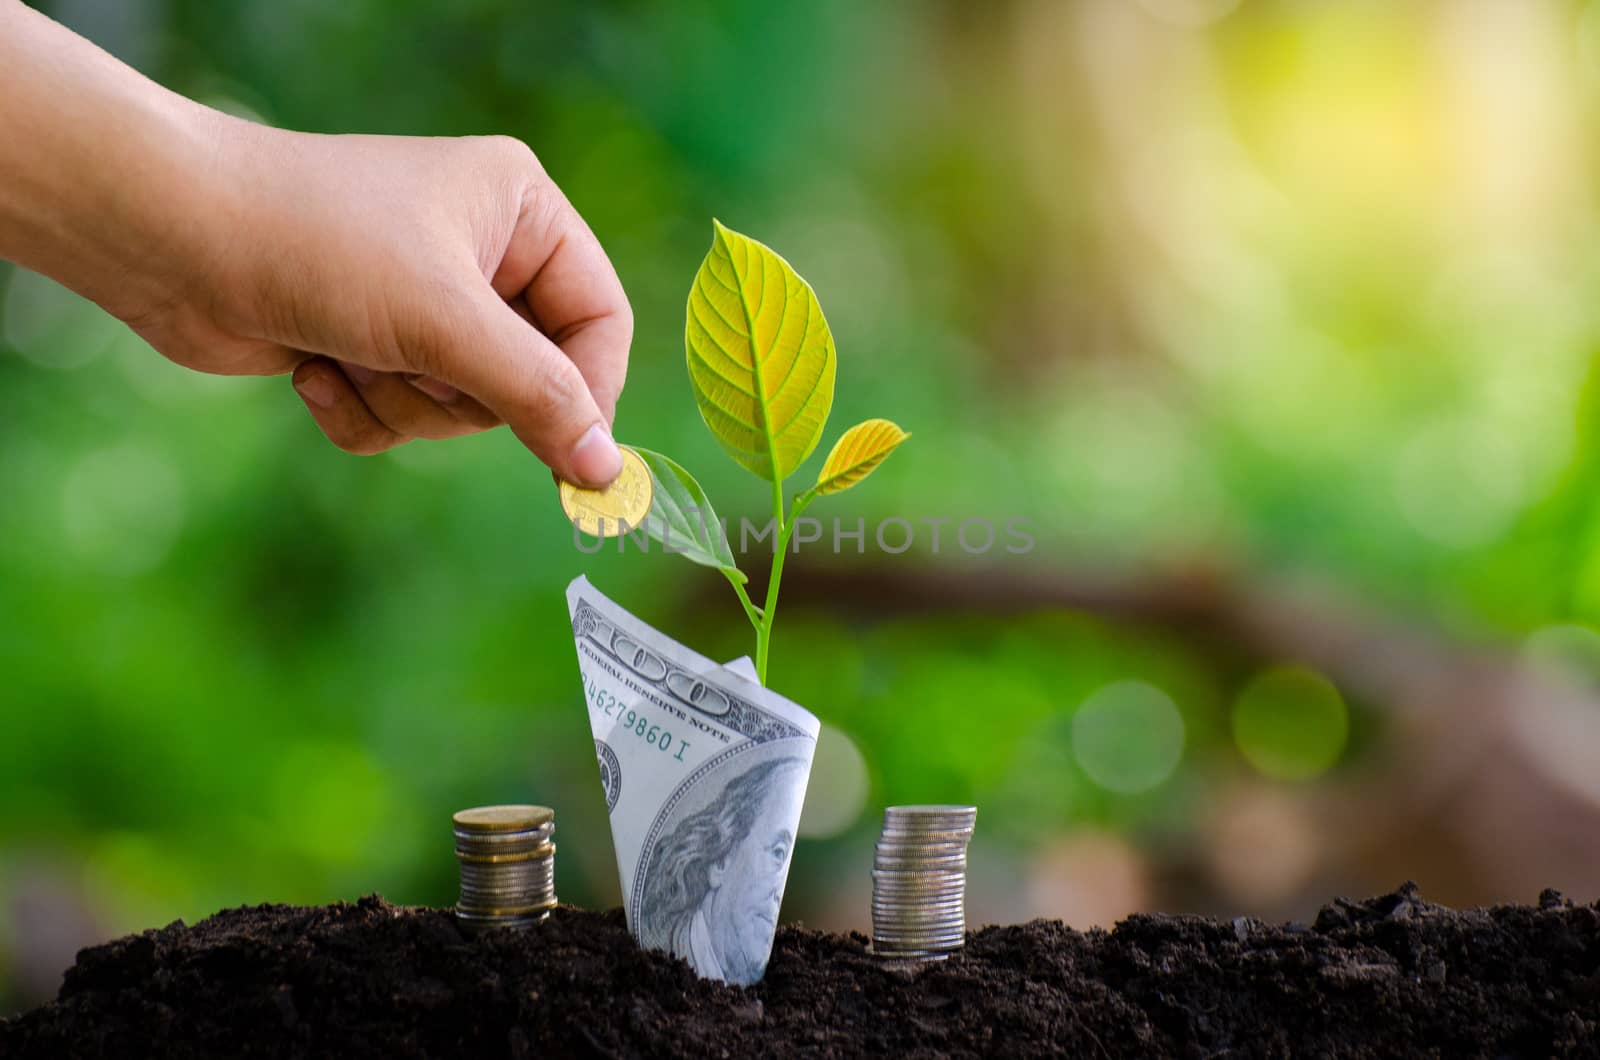 hand Put money Bottle Banknotes tree Image of bank note with plant growing on top for business green natural background money saving and investment financial concept by sarayut_thaneerat